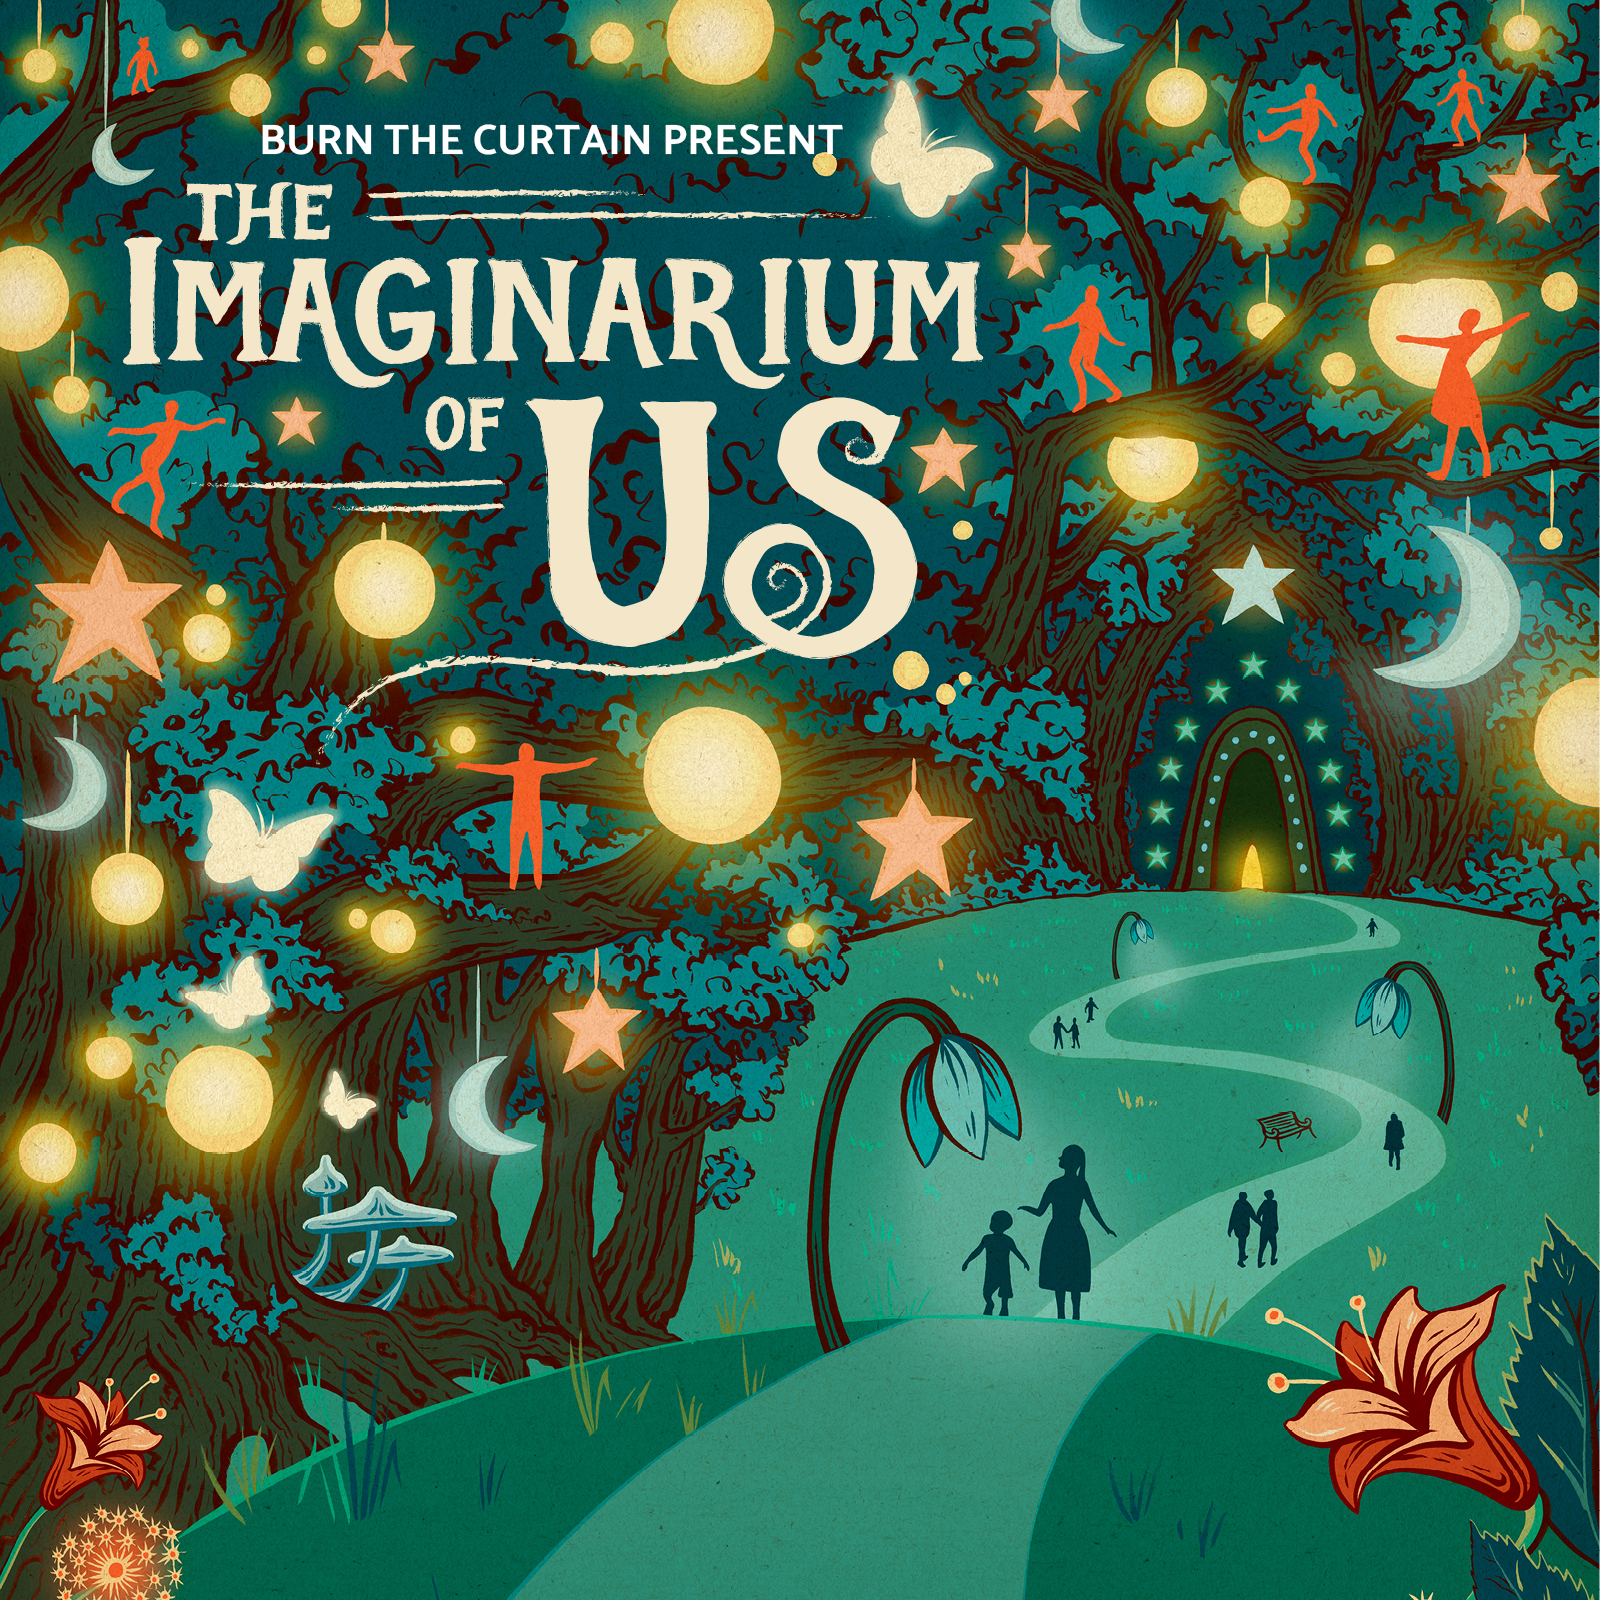 Poster for The Imaginarium of Us. An illustration of people walking through a park at night, surrounded by trees and their branches are filled with lights, stars, moons, butterflies and people.